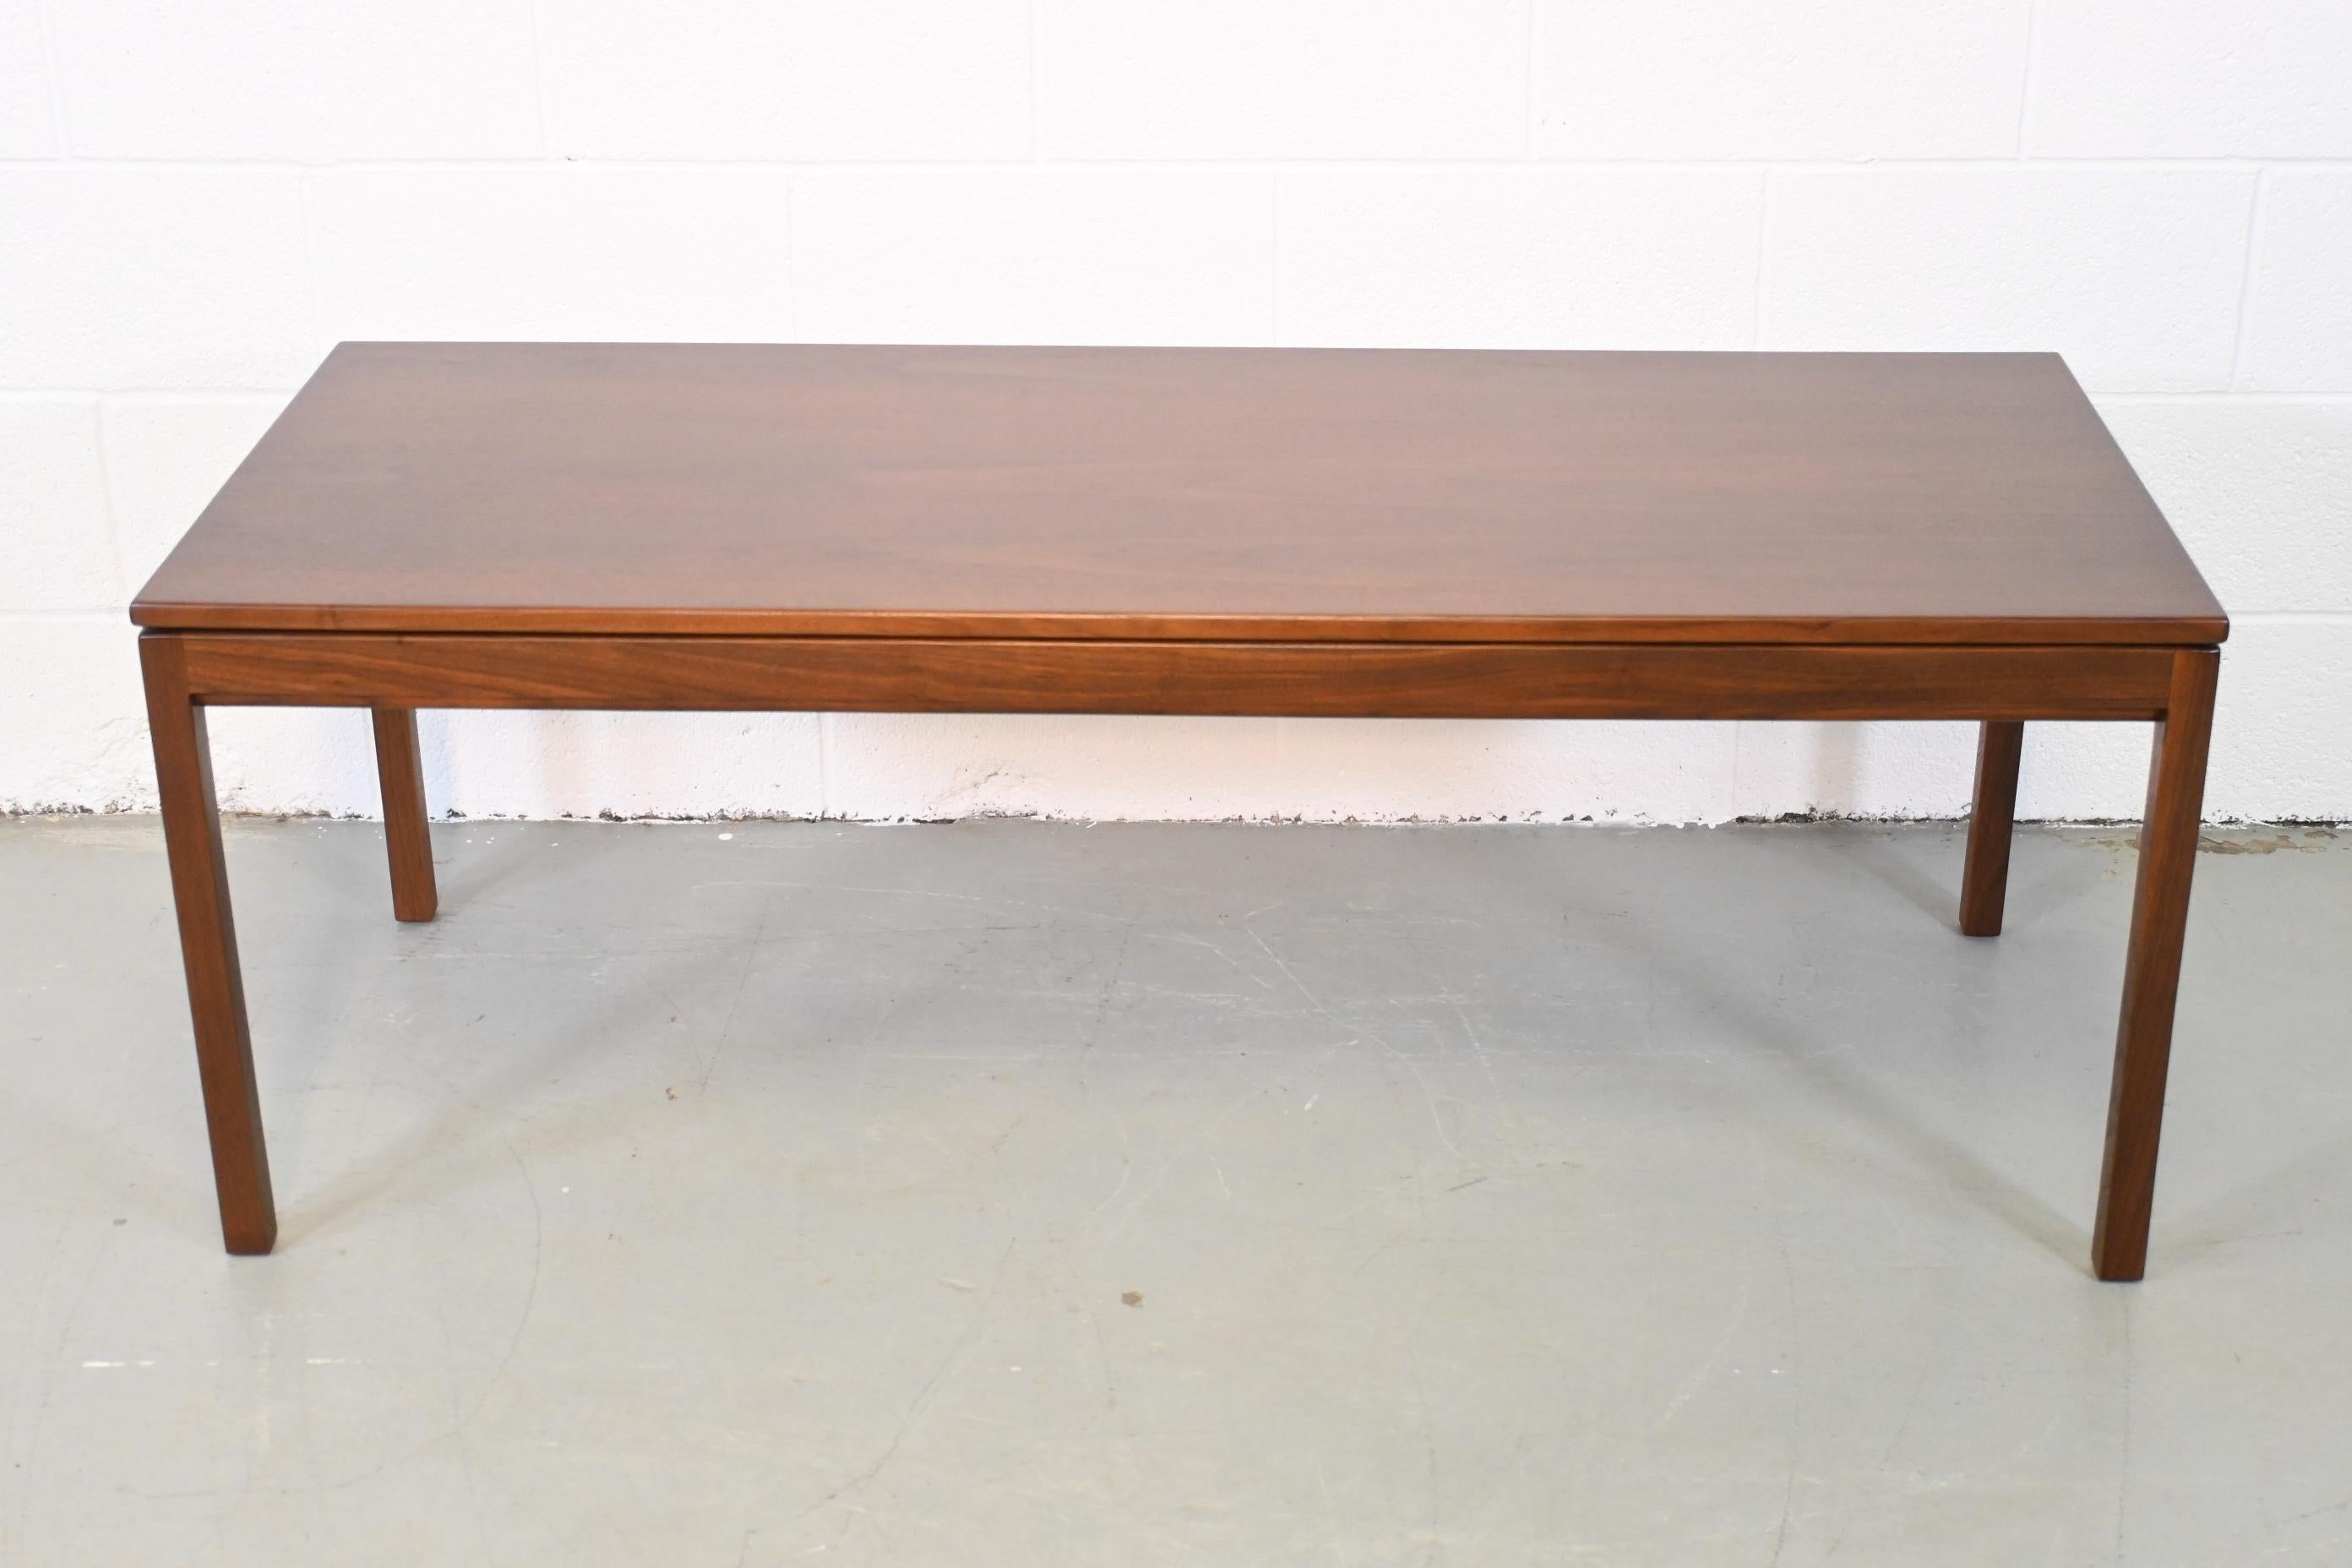 Jens Risom Mid-Century Modern walnut coffee table

Jens Risom, USA, 1960s

Measures: 54 Wide x 22 Deep x 20 High.

Mid-Century Modern medium brown walnut rectangular coffee table.

Professionally Refinished. Excellent condition.